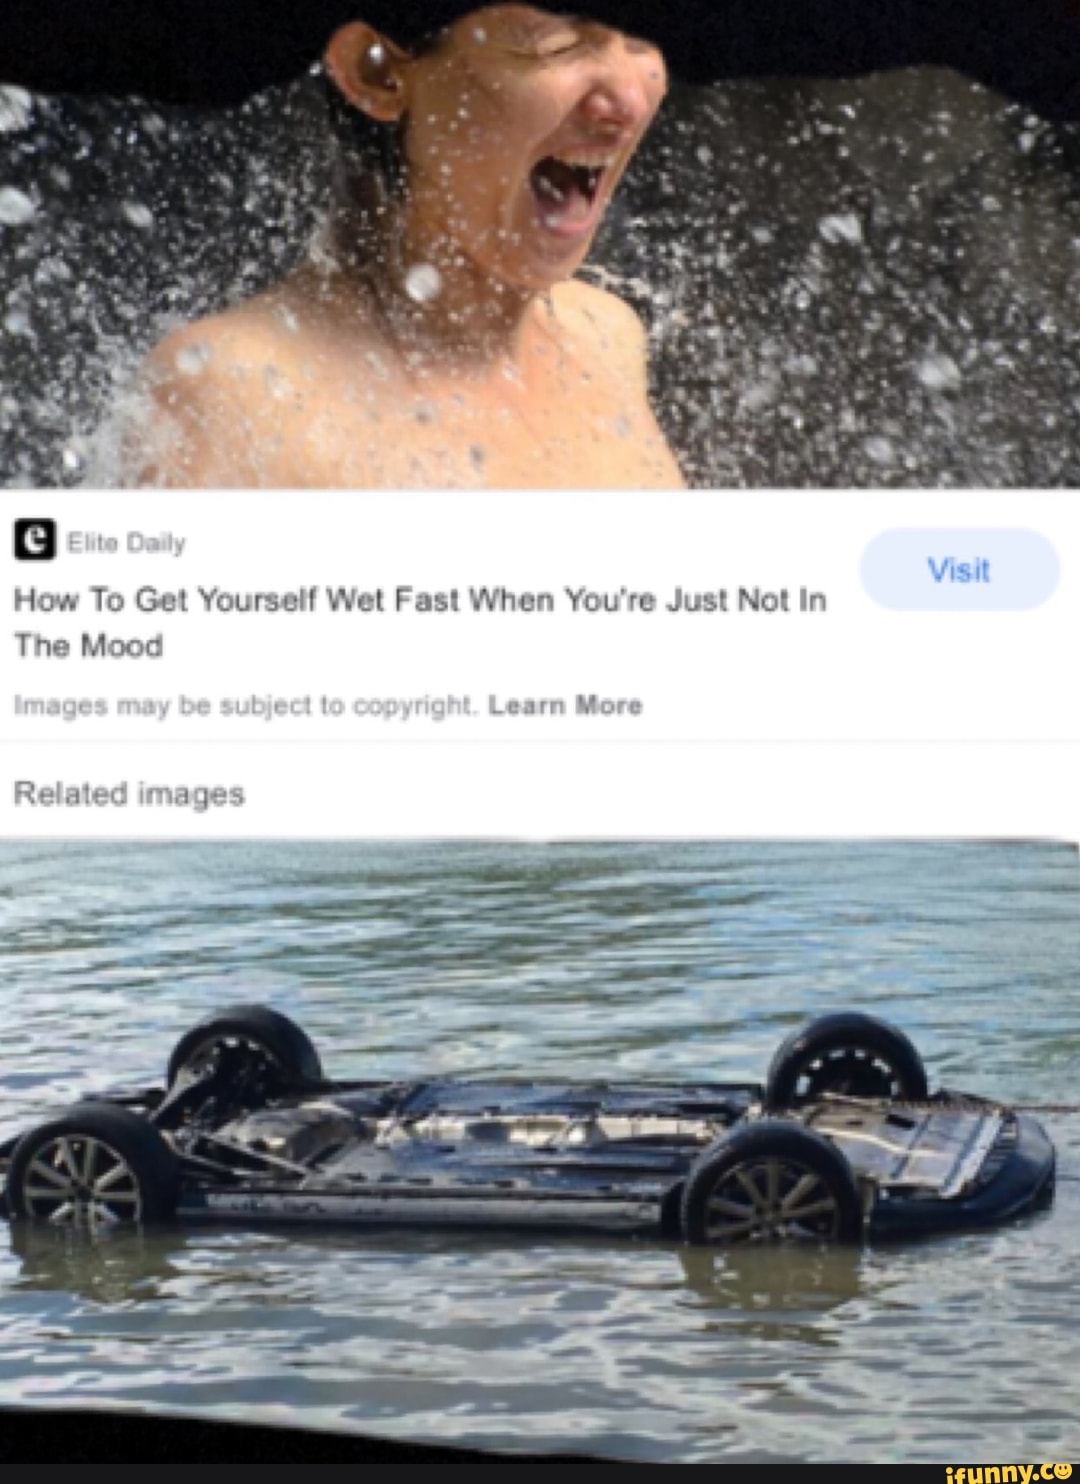 How To Make Yourself Wet